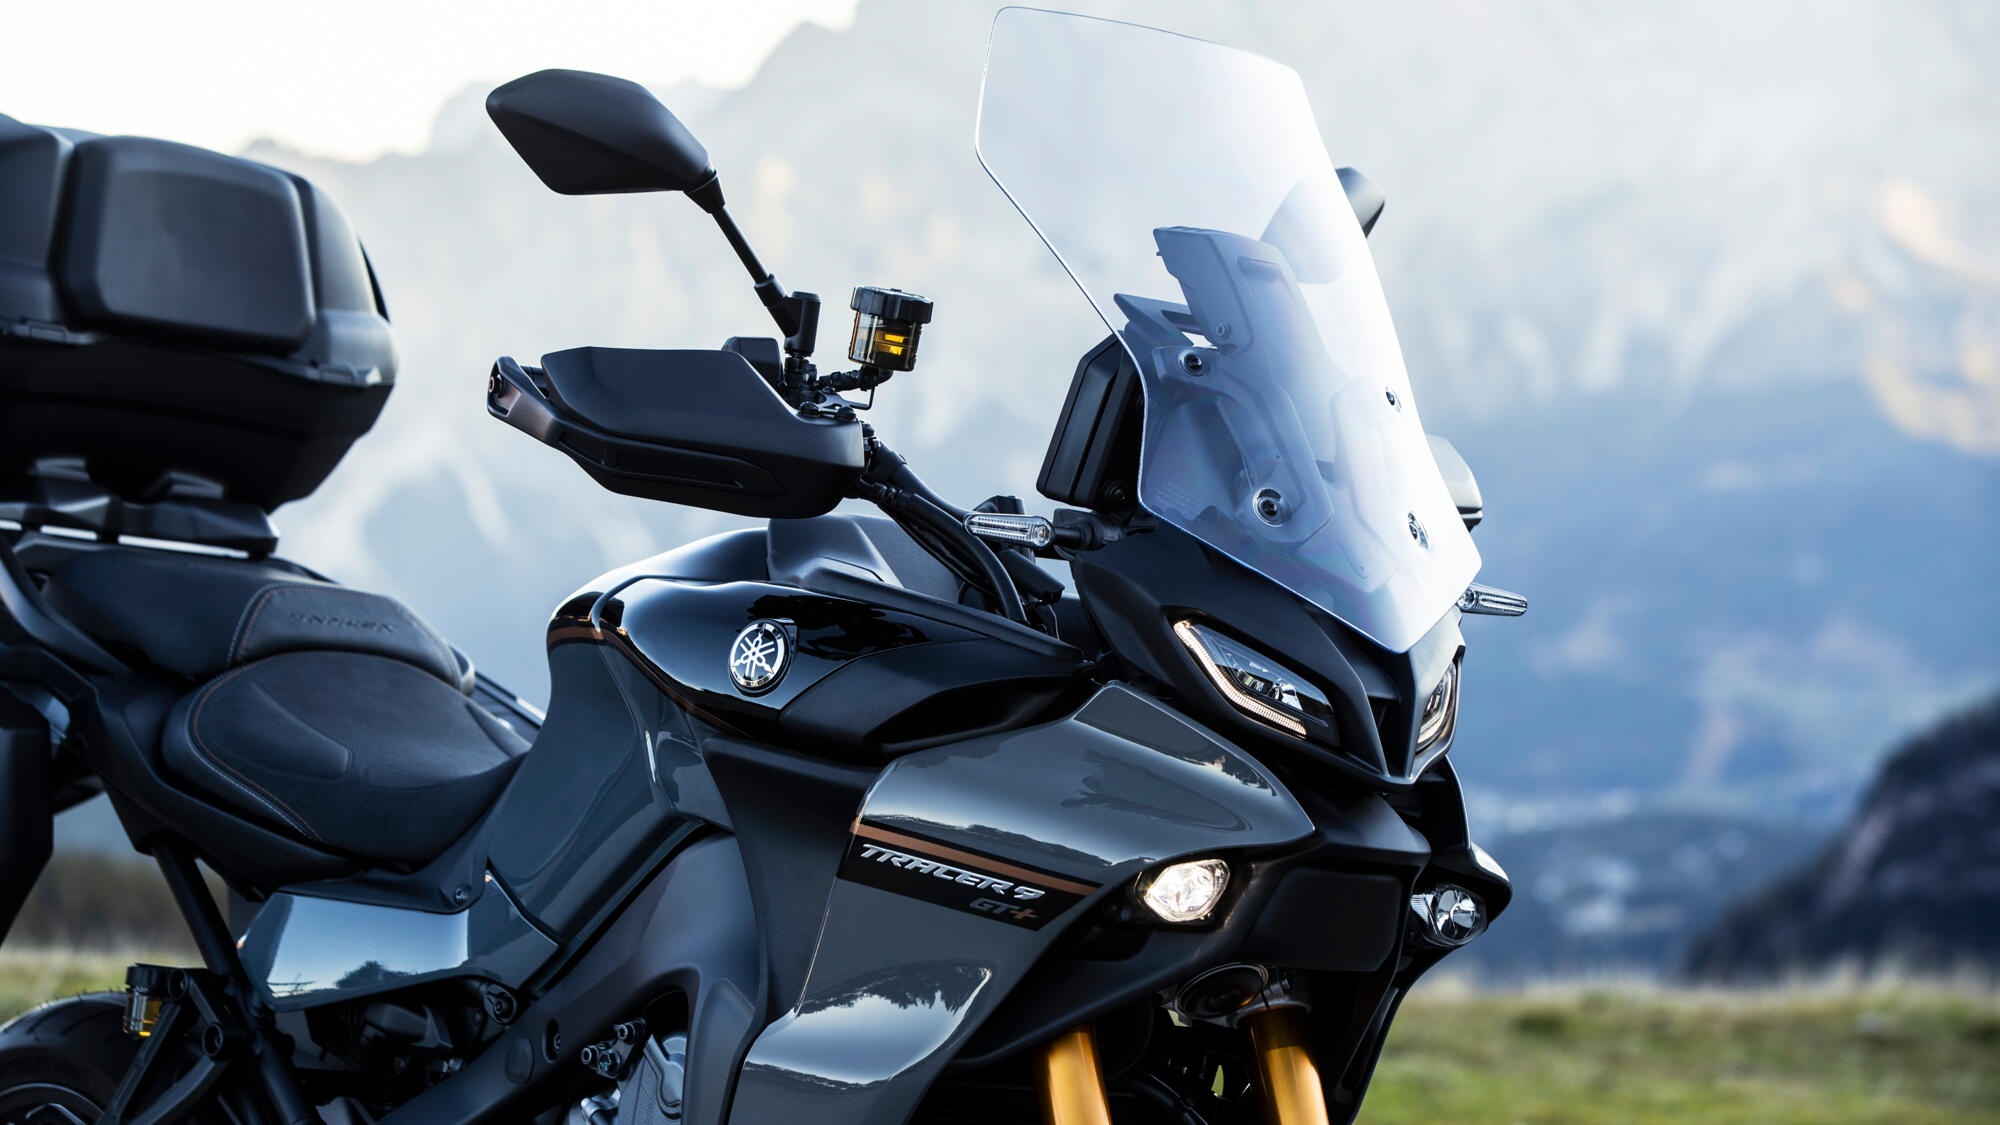 Yamaha Tracer 9 GT+ 2023 is coming to Vietnam, expected price over 400 million VND Yamaha Tracer 9 GT+ 2023 (2).jpeg